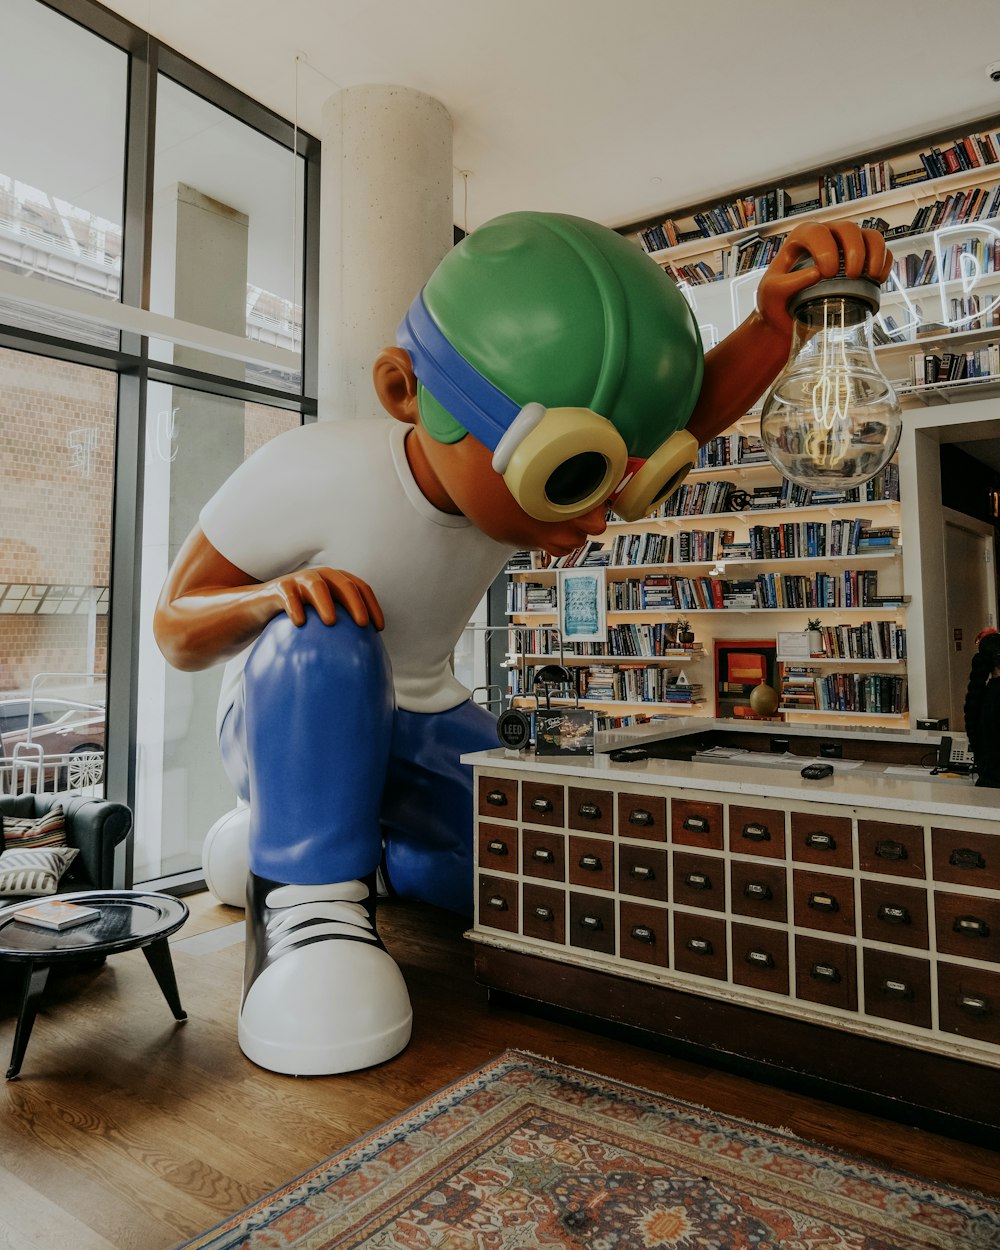 a large inflatable character sitting in a living room